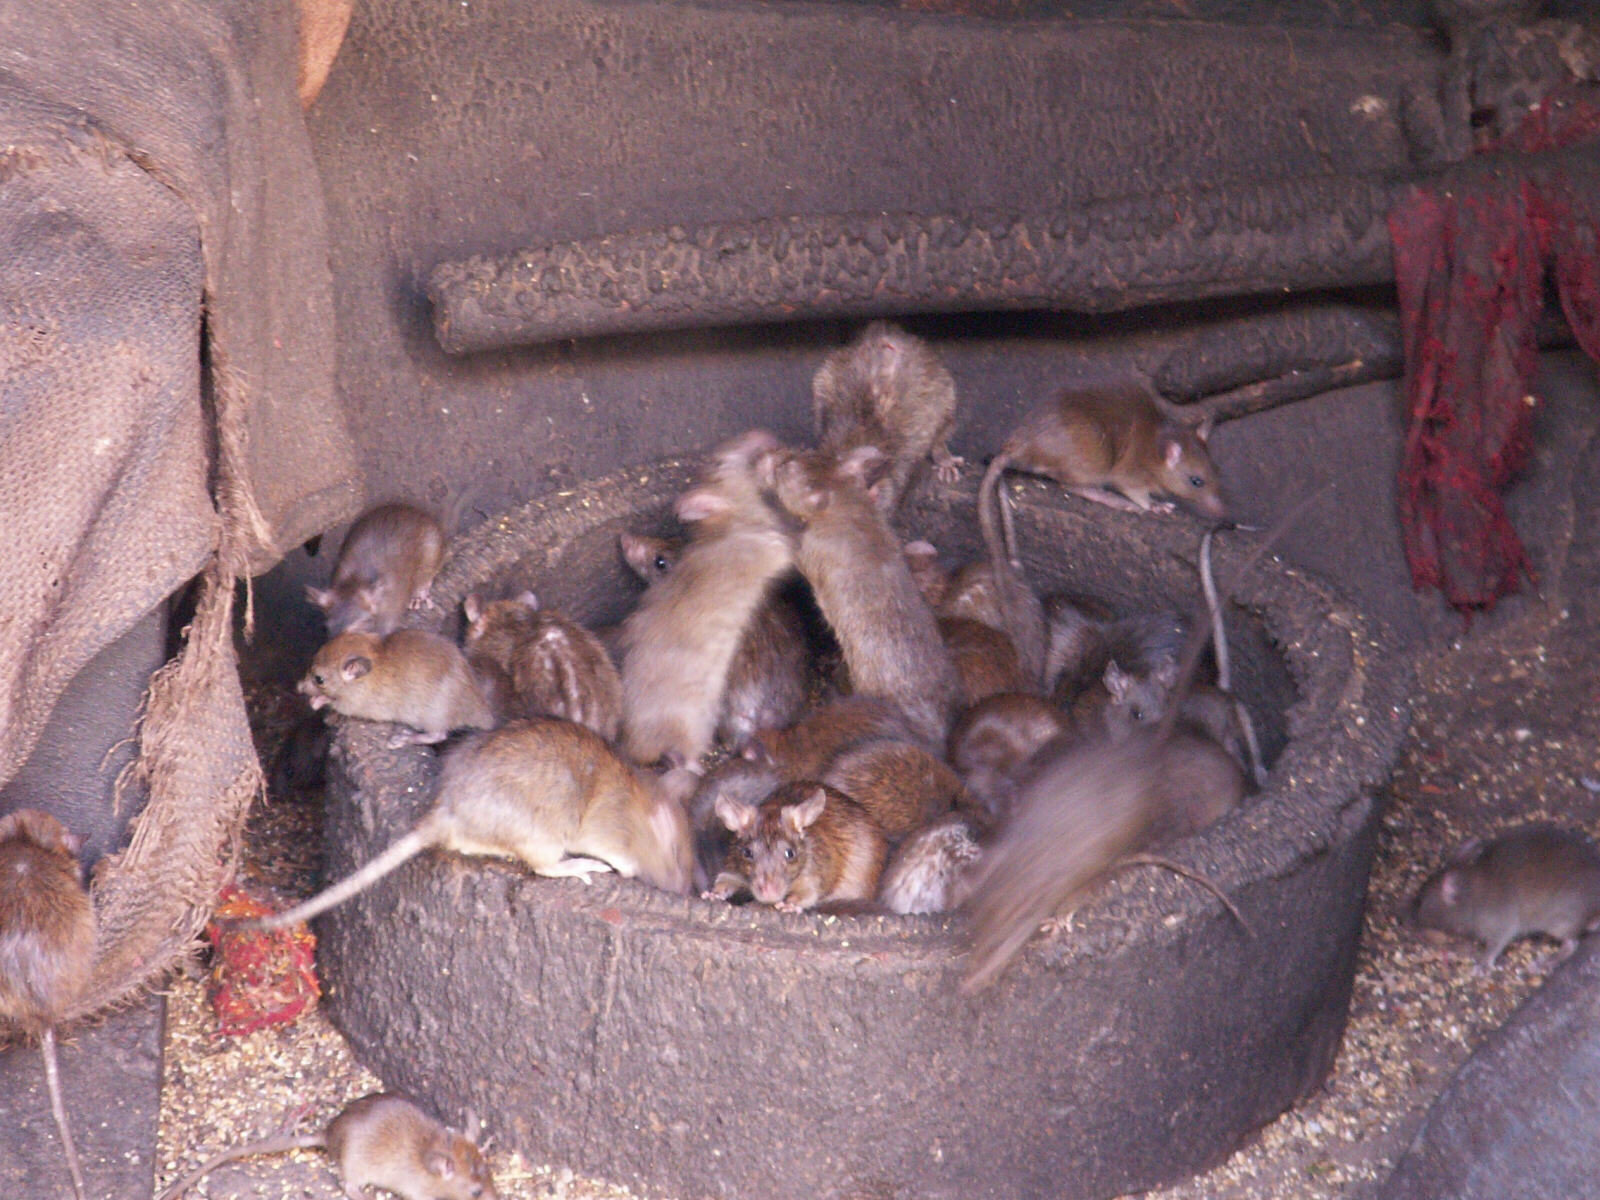 In the Temple of the Rats near Bikaner, Rajasthan